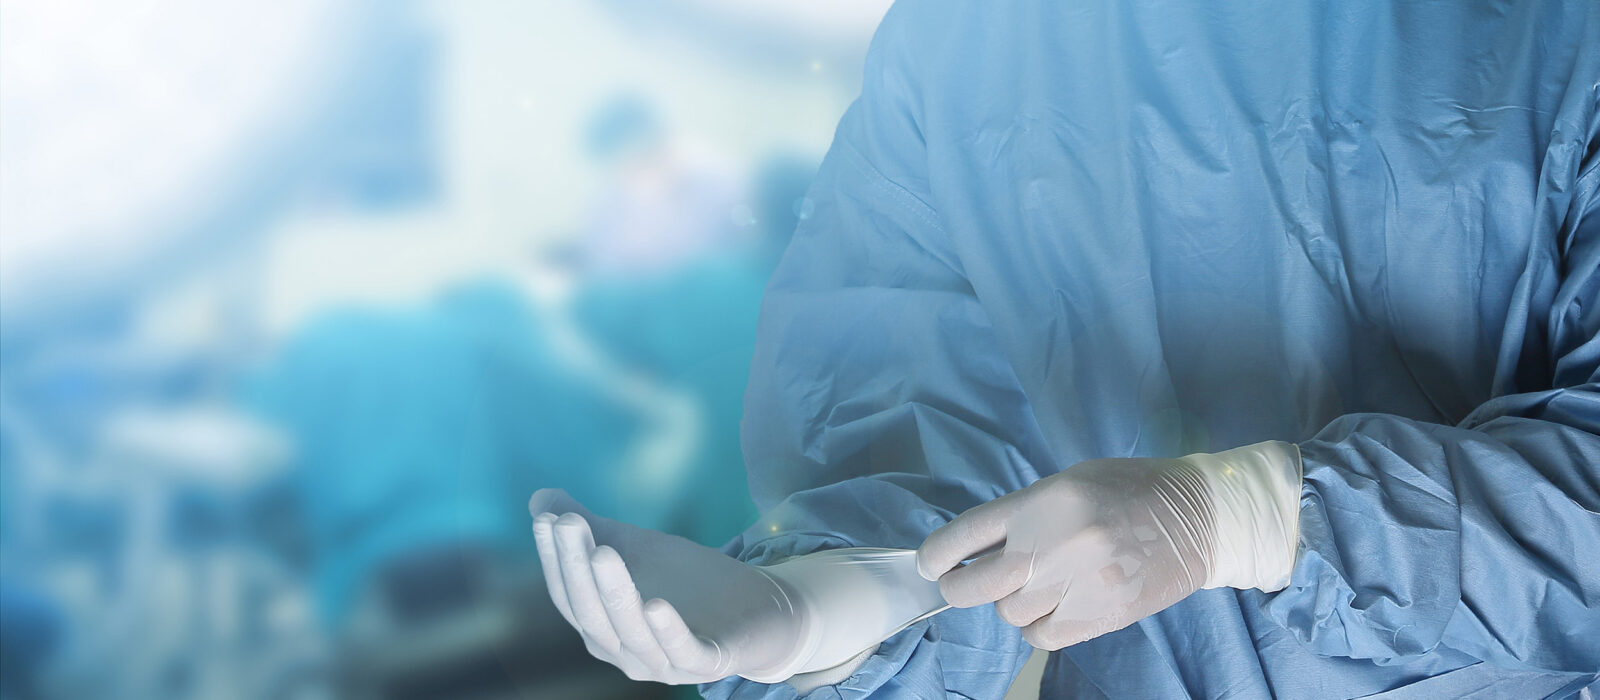 Helping surgeons increase patient survival rate through novel EVT technology